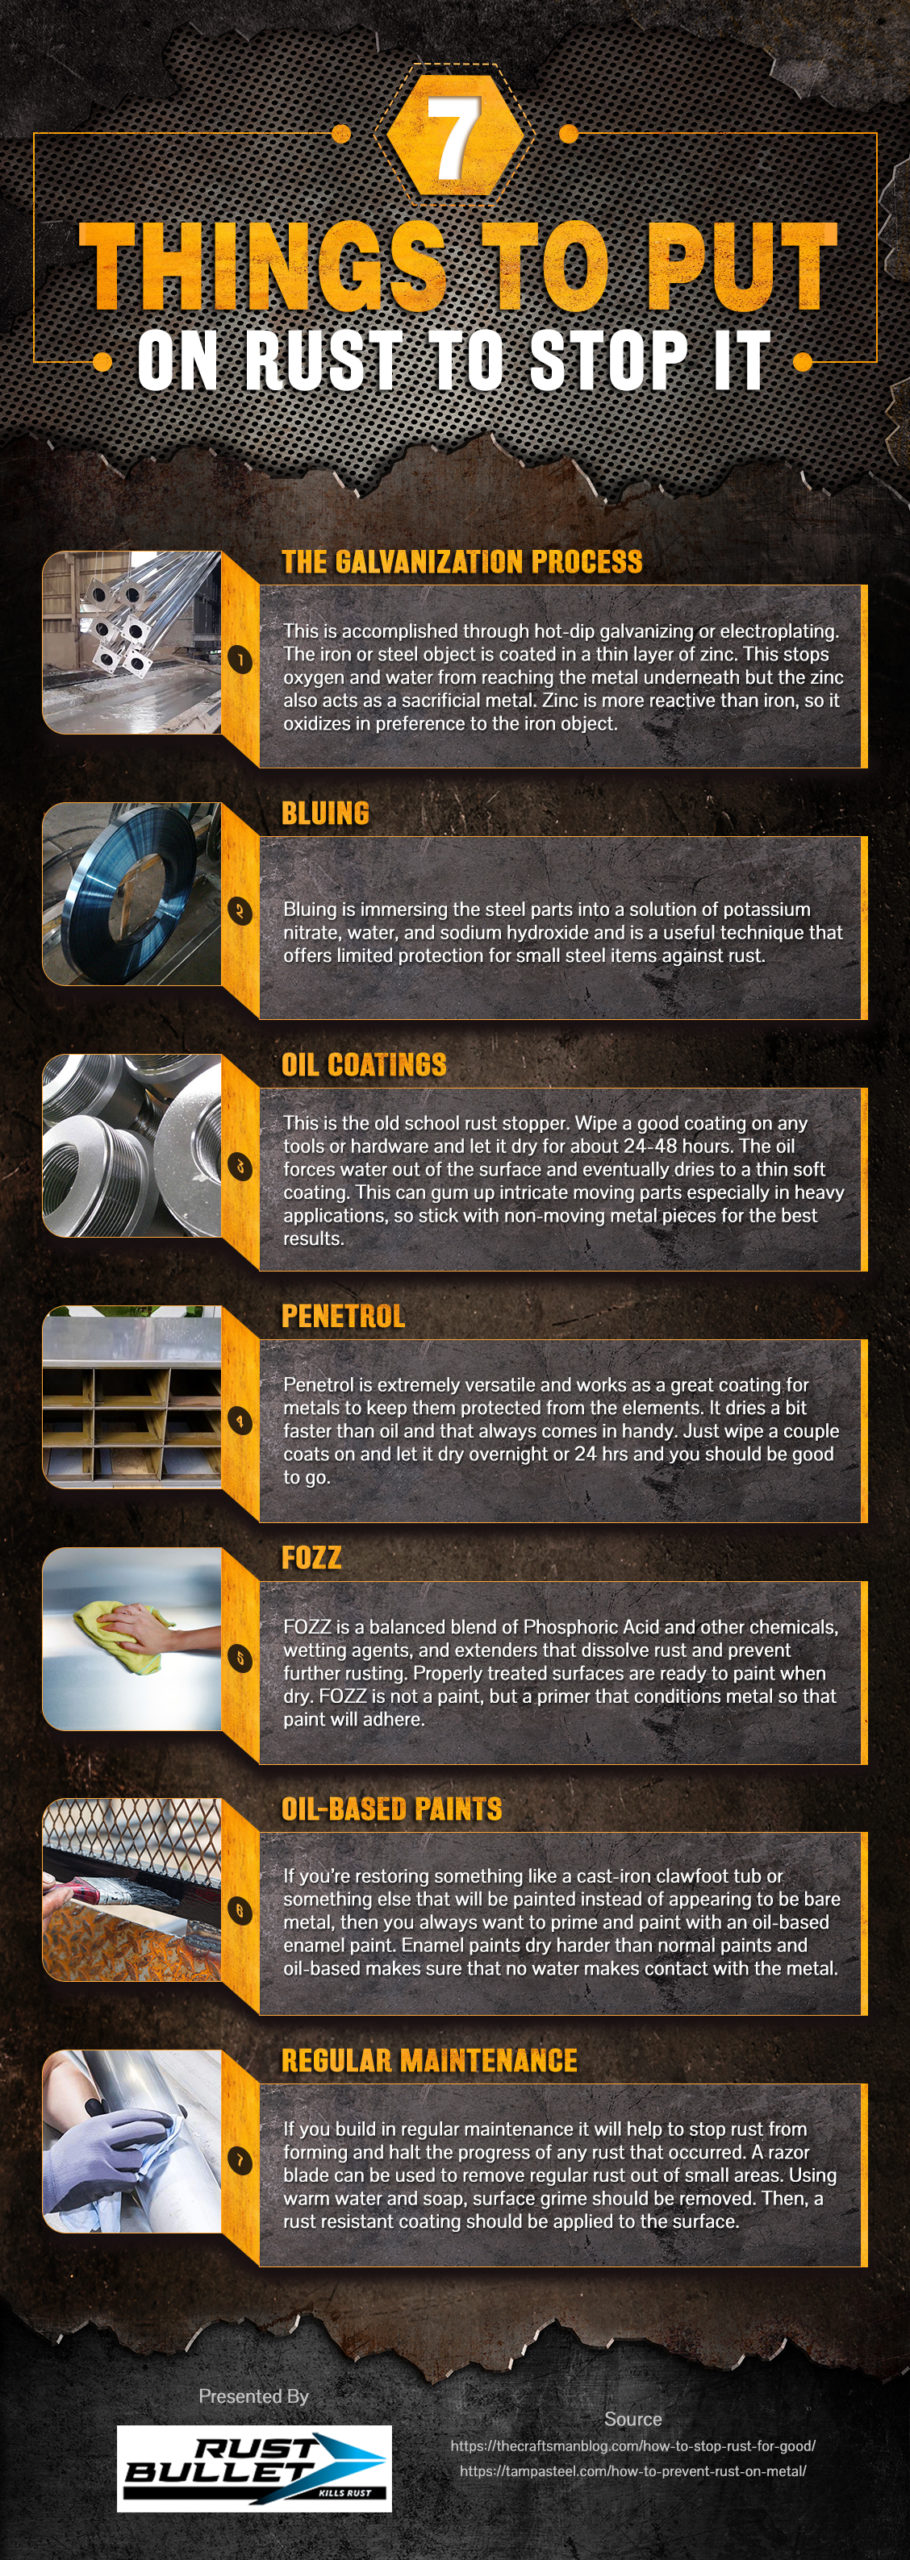 [Infographic] 7 Things to Put on Rust to Stop it